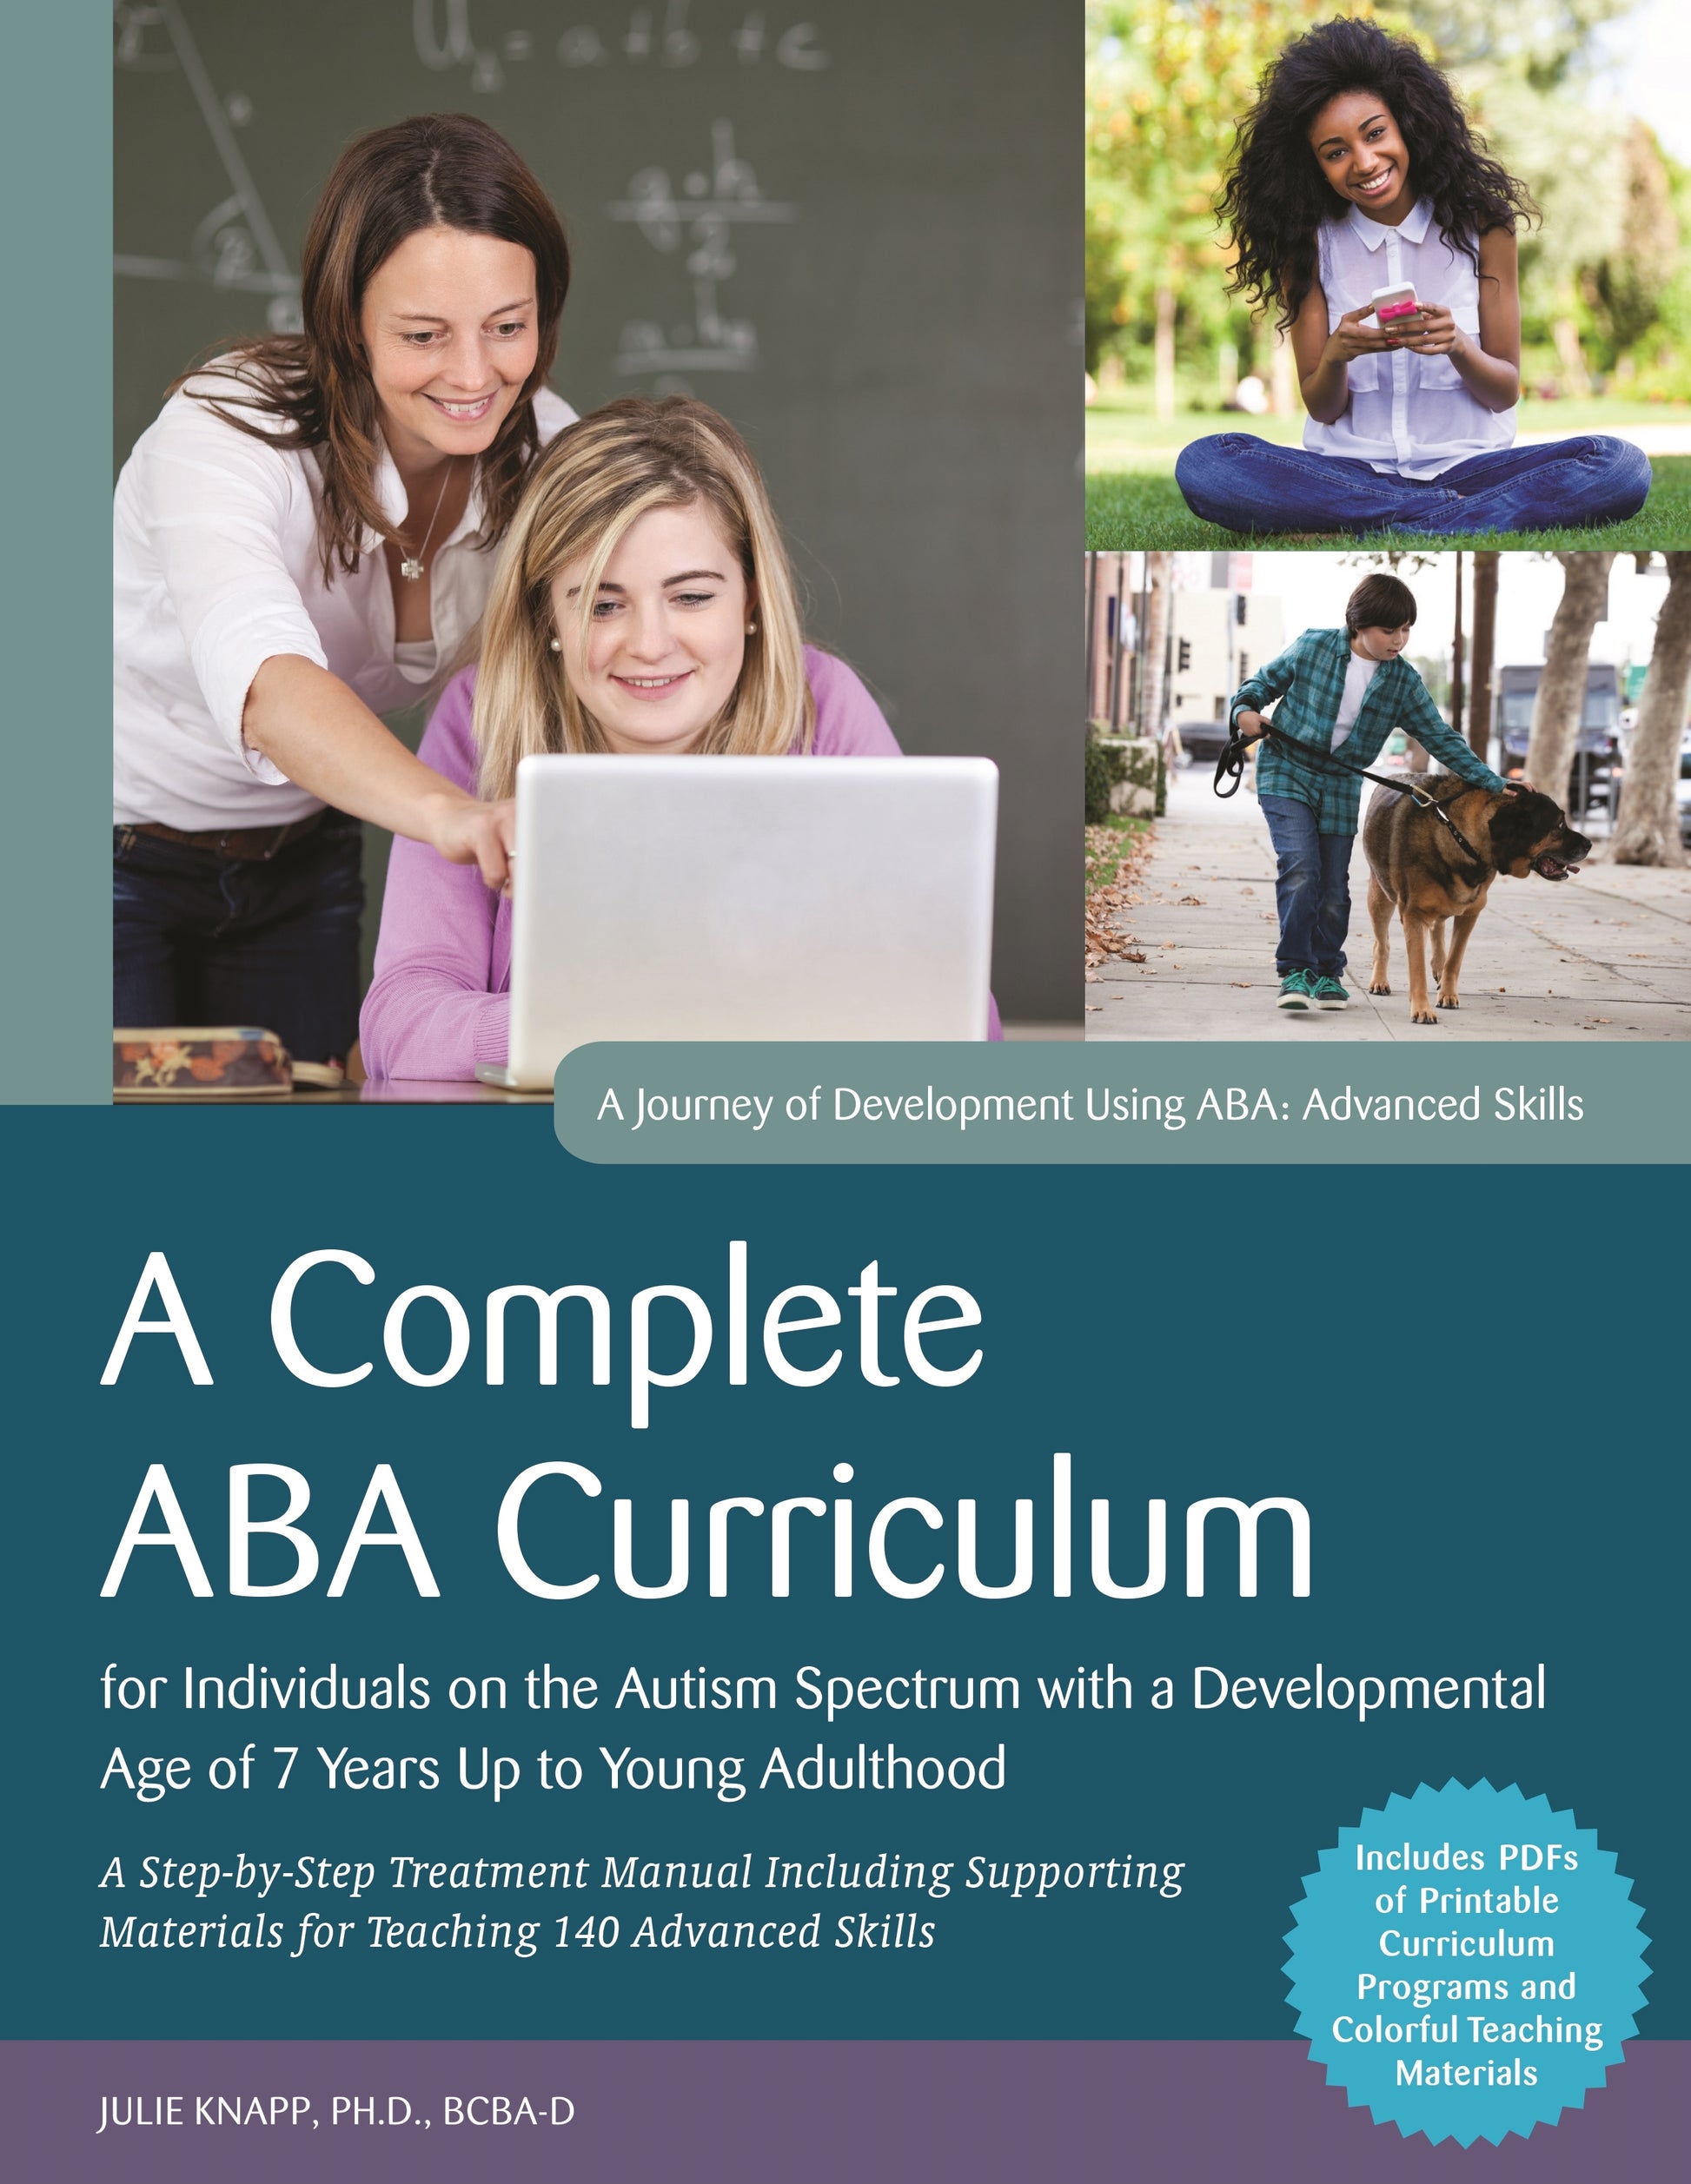 A Complete ABA Curriculum for Individuals on the Autism Spectrum with a Developmental Age of 7 Years Up to Young Adulthood by Carolline Turnbull, Julie Knapp